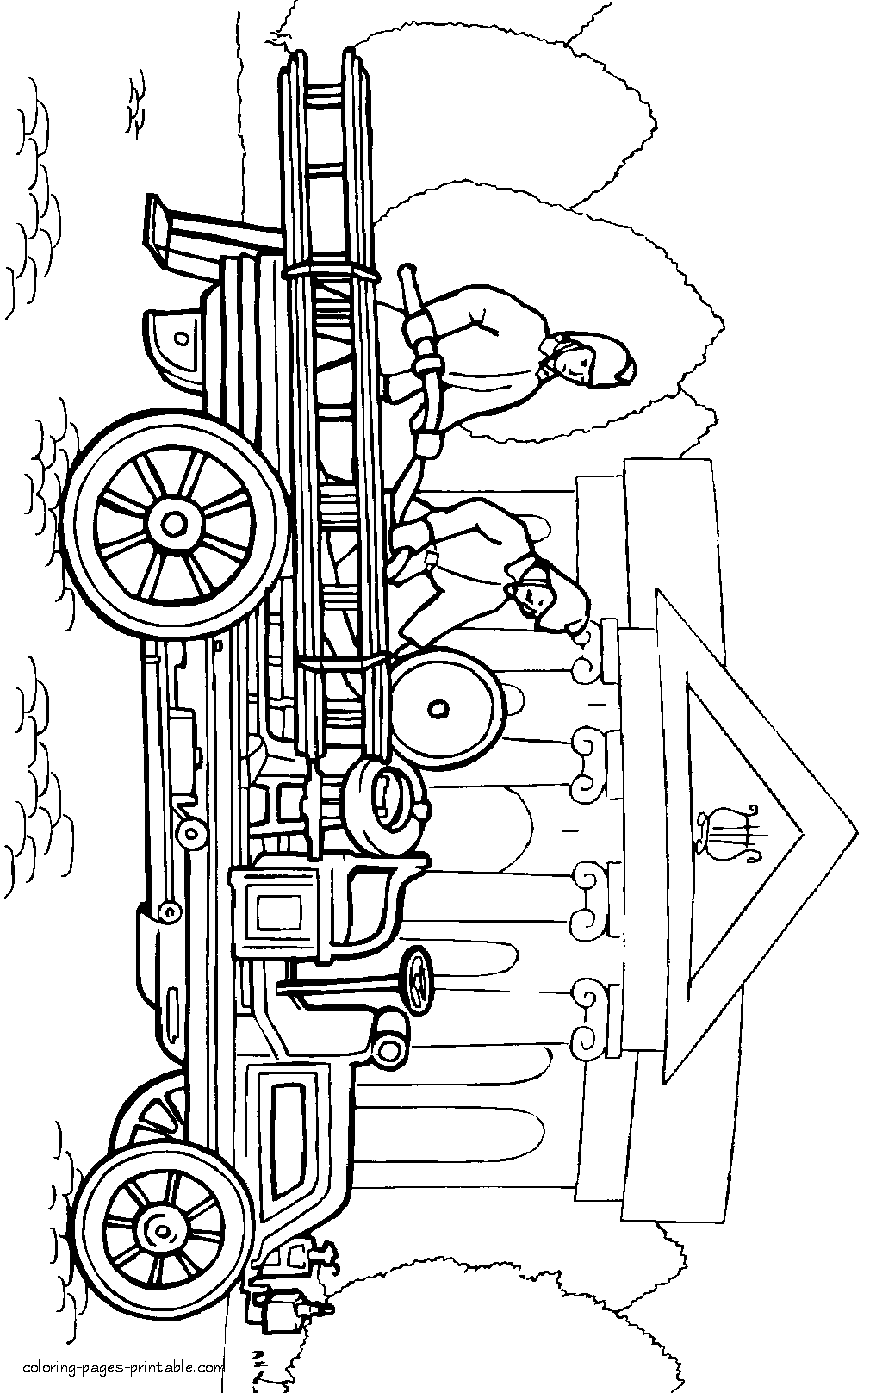 Old fire engine coloring page. 1904 release